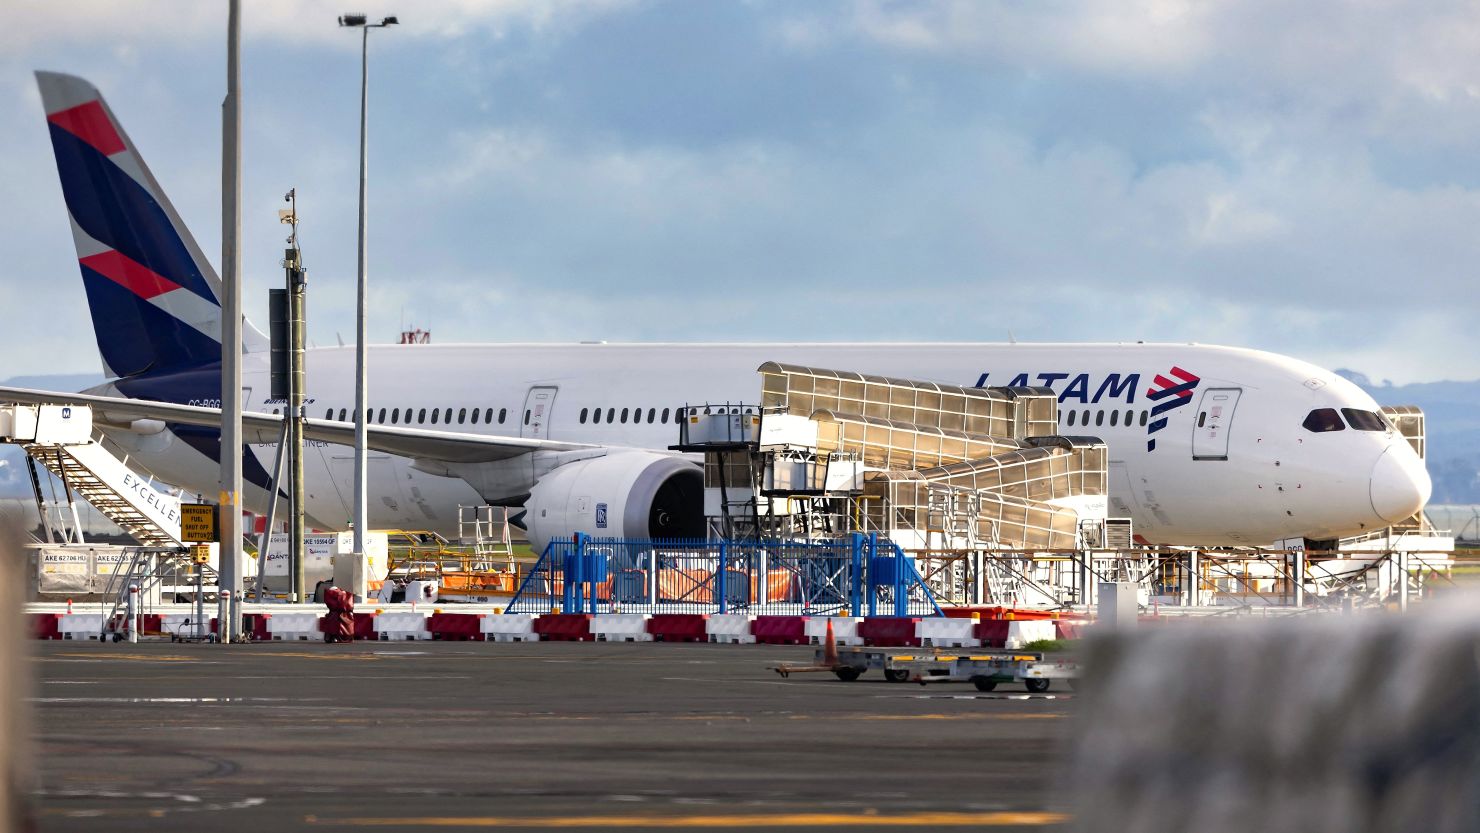 The LATAM Airlines Boeing 787 Dreamliner plane that suddenly lost altitude mid-flight a day earlier, dropping violently and injuring dozens of terrified travellers, is seen on the tarmac of the Auckland International Airport in Auckland on March 12, 2024.